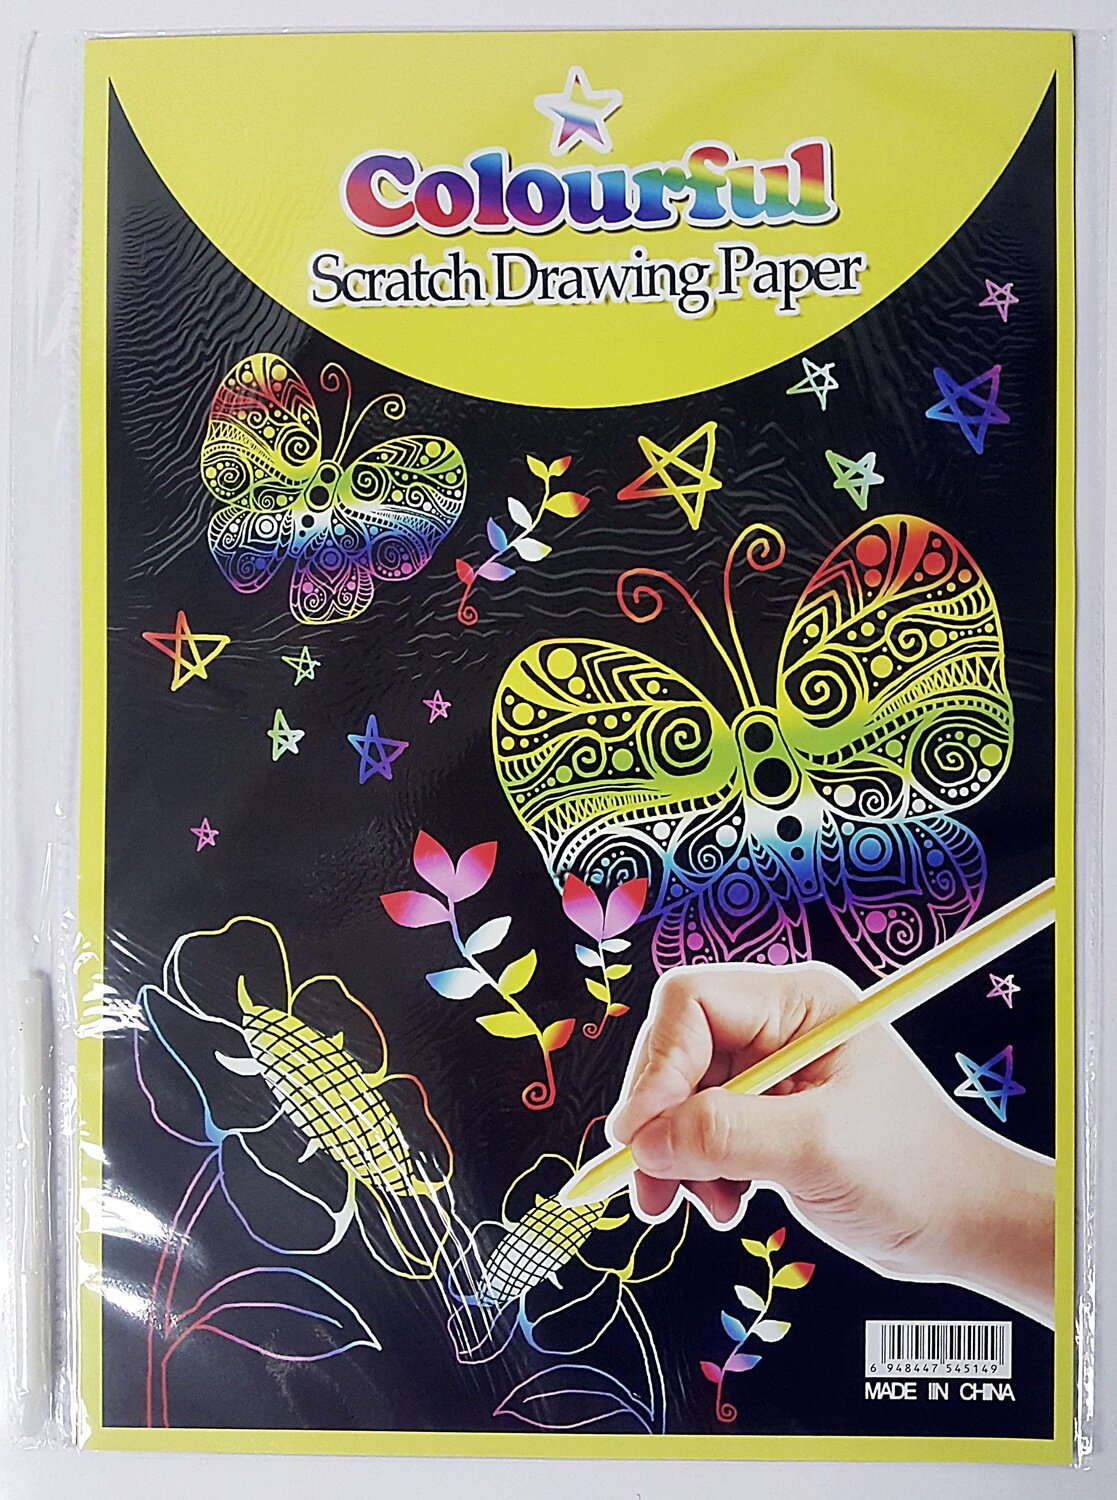 Colourful Scratch Drawing Paper